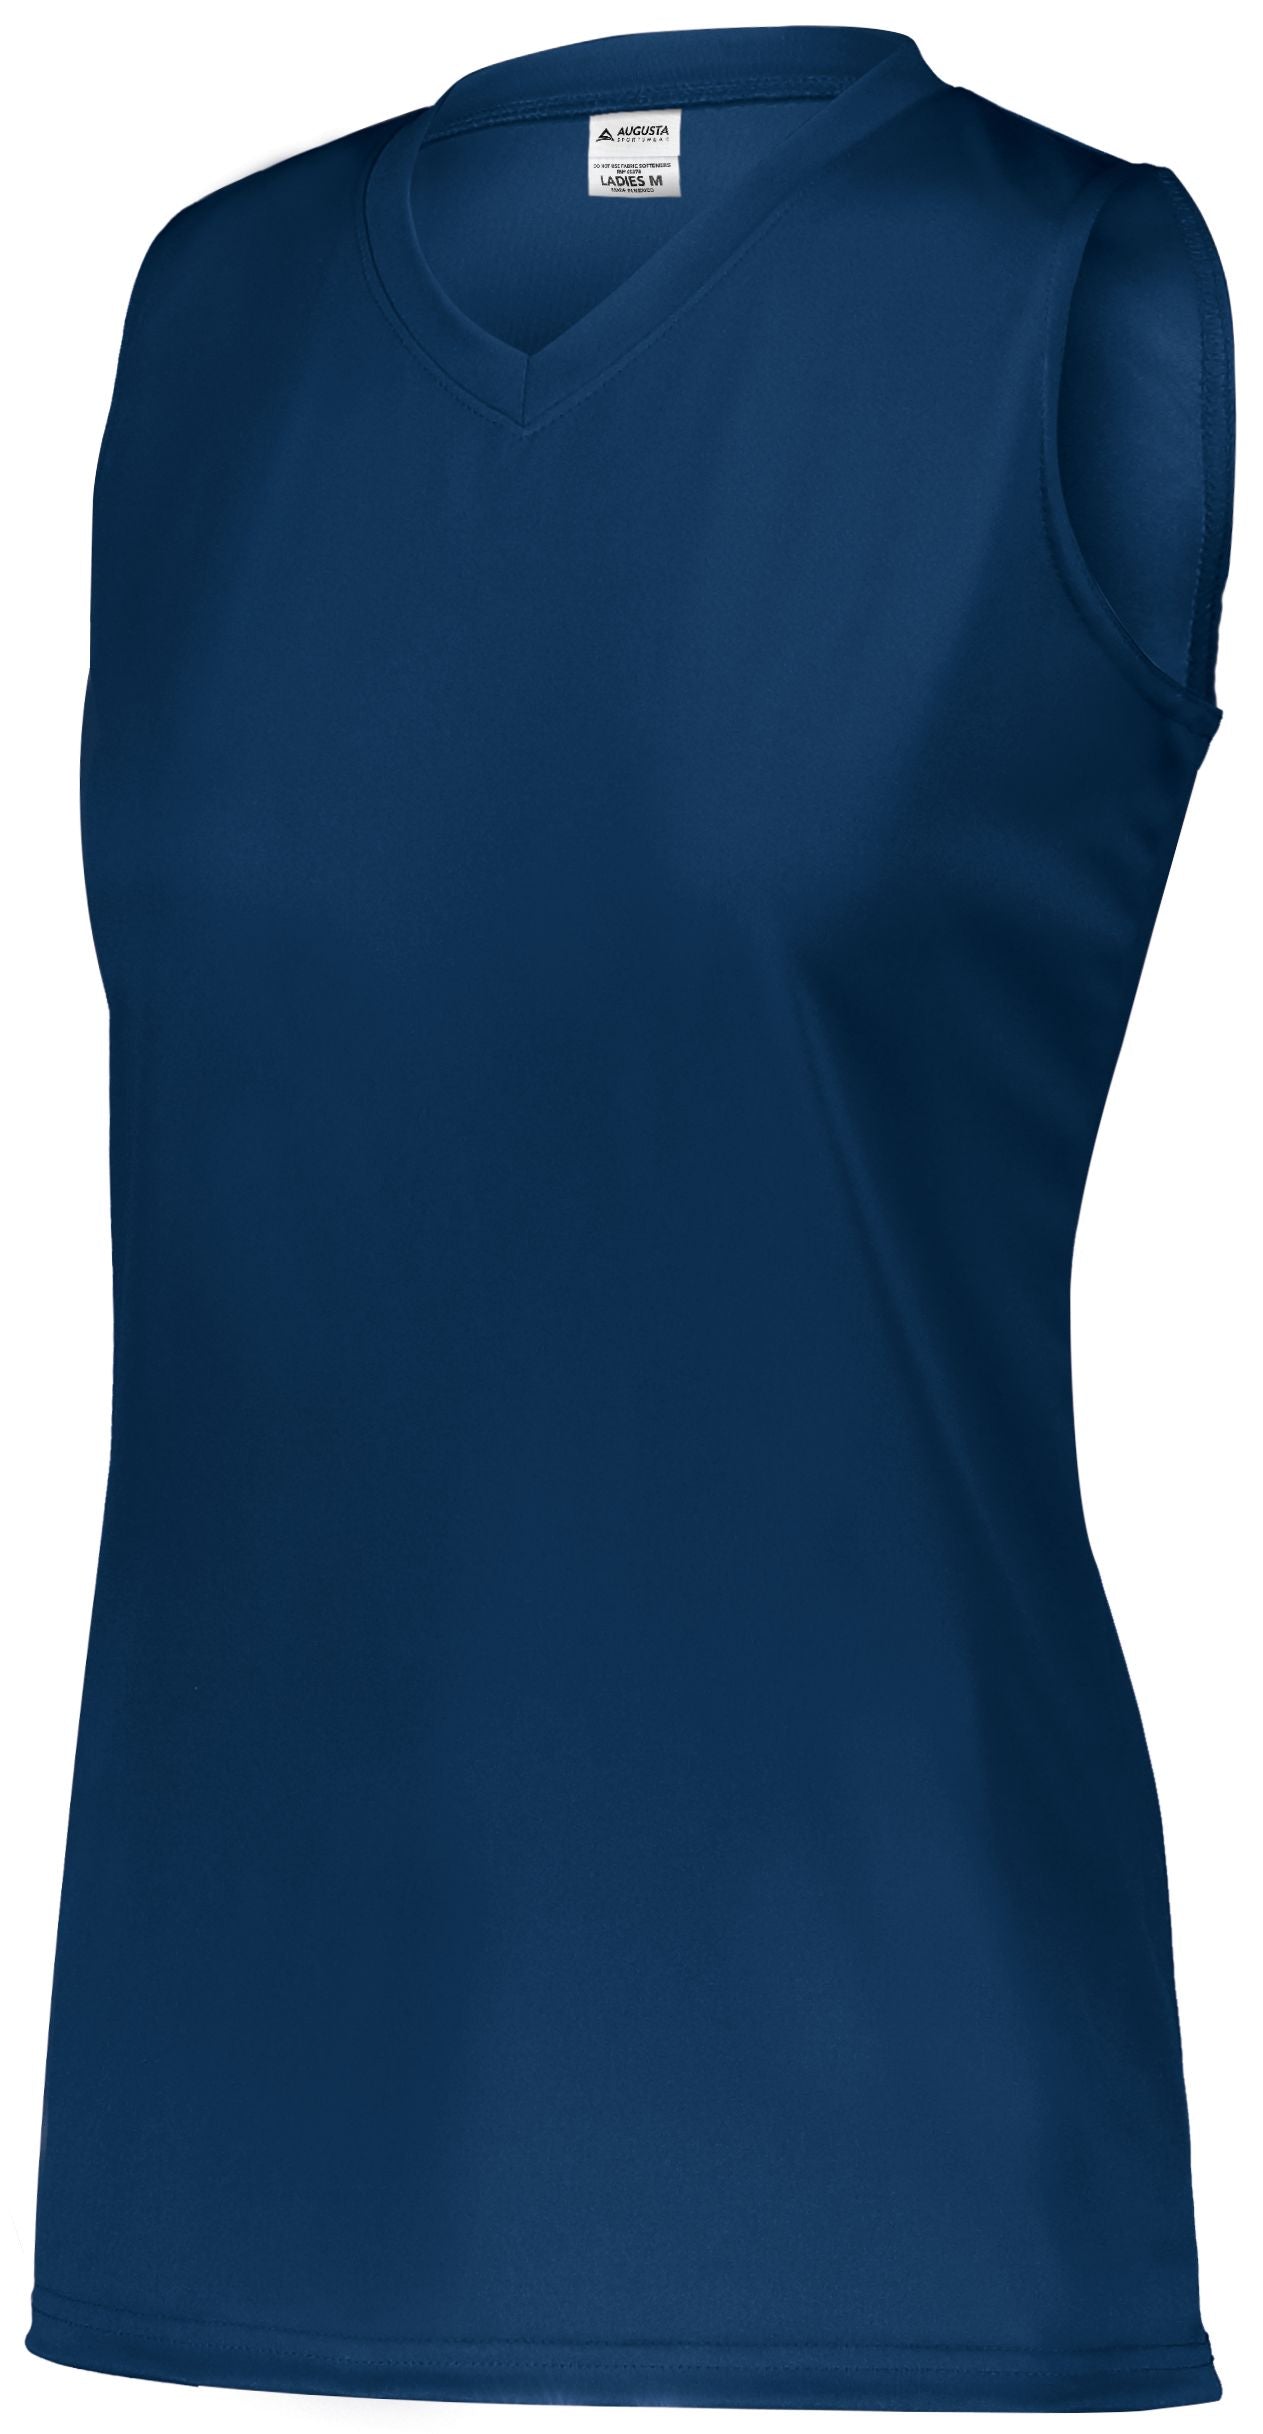 Augusta Sportswear Girls Attain Wicking Sleeveless Jersey in Navy  -Part of the Girls, Augusta-Products, Softball, Girls-Jersey, Shirts product lines at KanaleyCreations.com